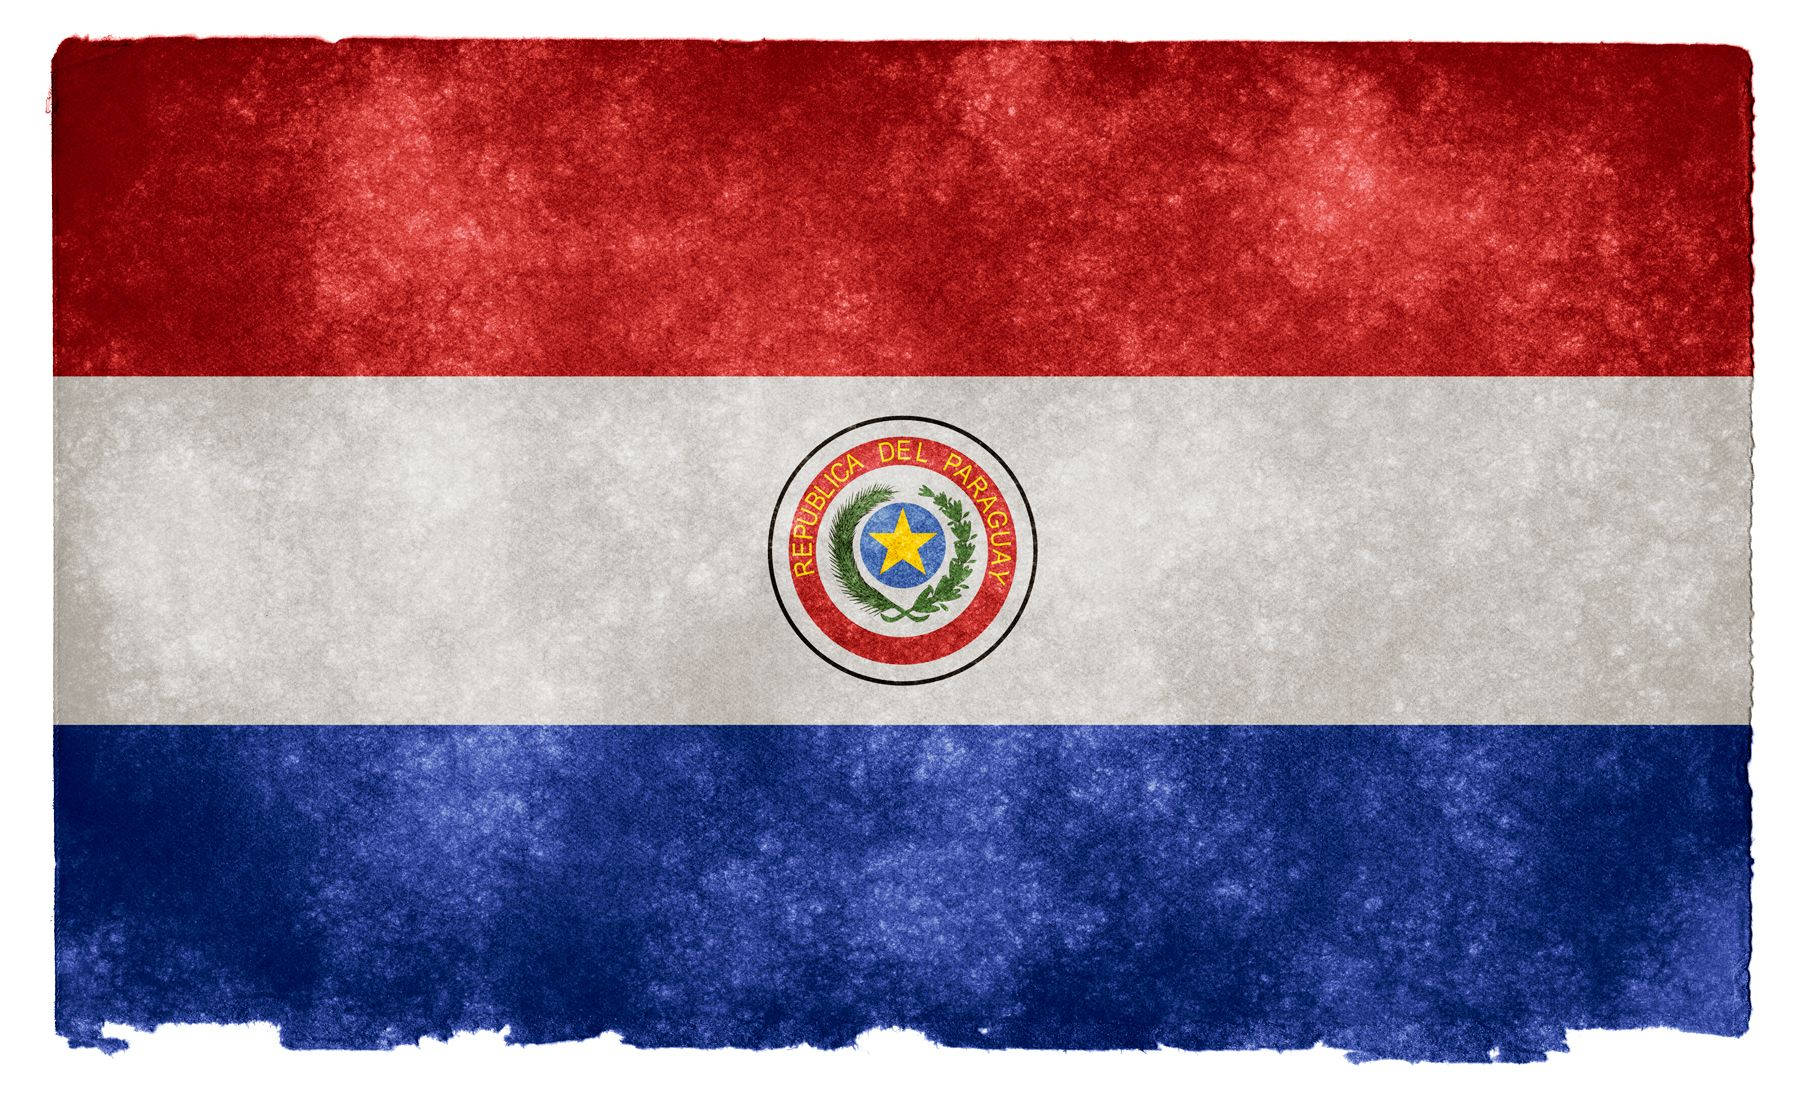 Proud Display Of Paraguay's Flag